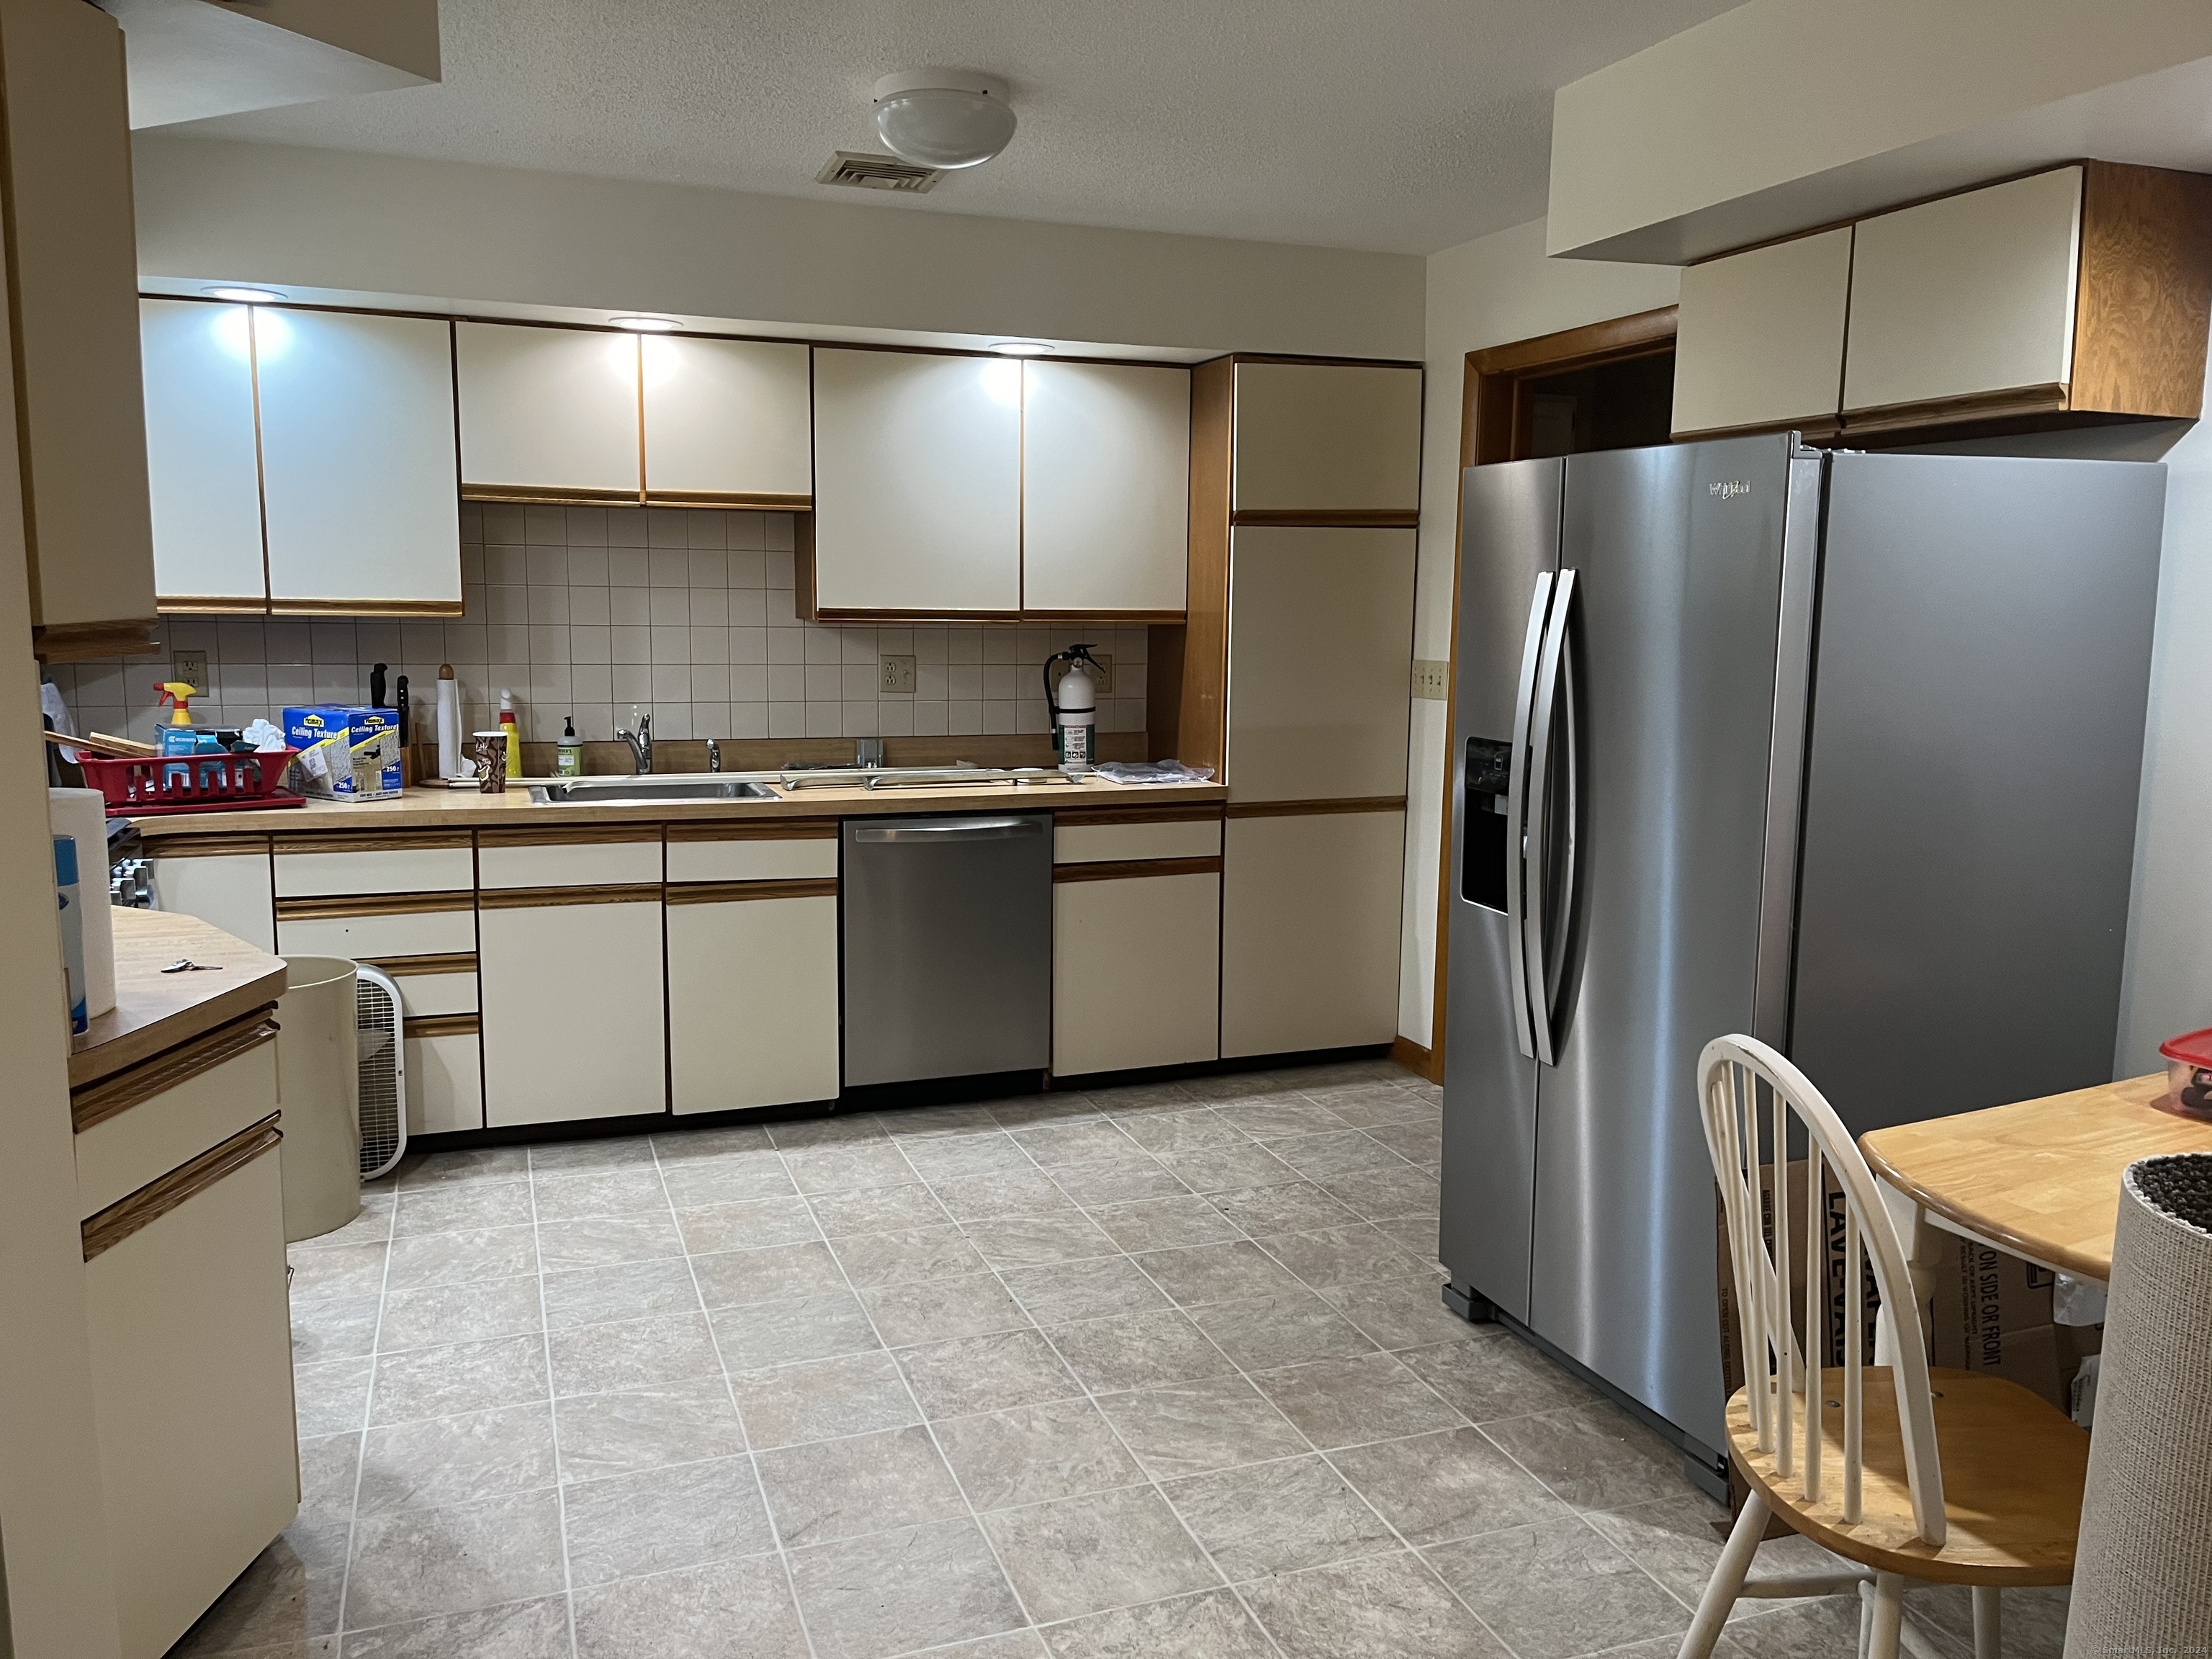 a kitchen with stainless steel appliances granite countertop a refrigerator a sink dishwasher a stove top oven a sink and dishwasher